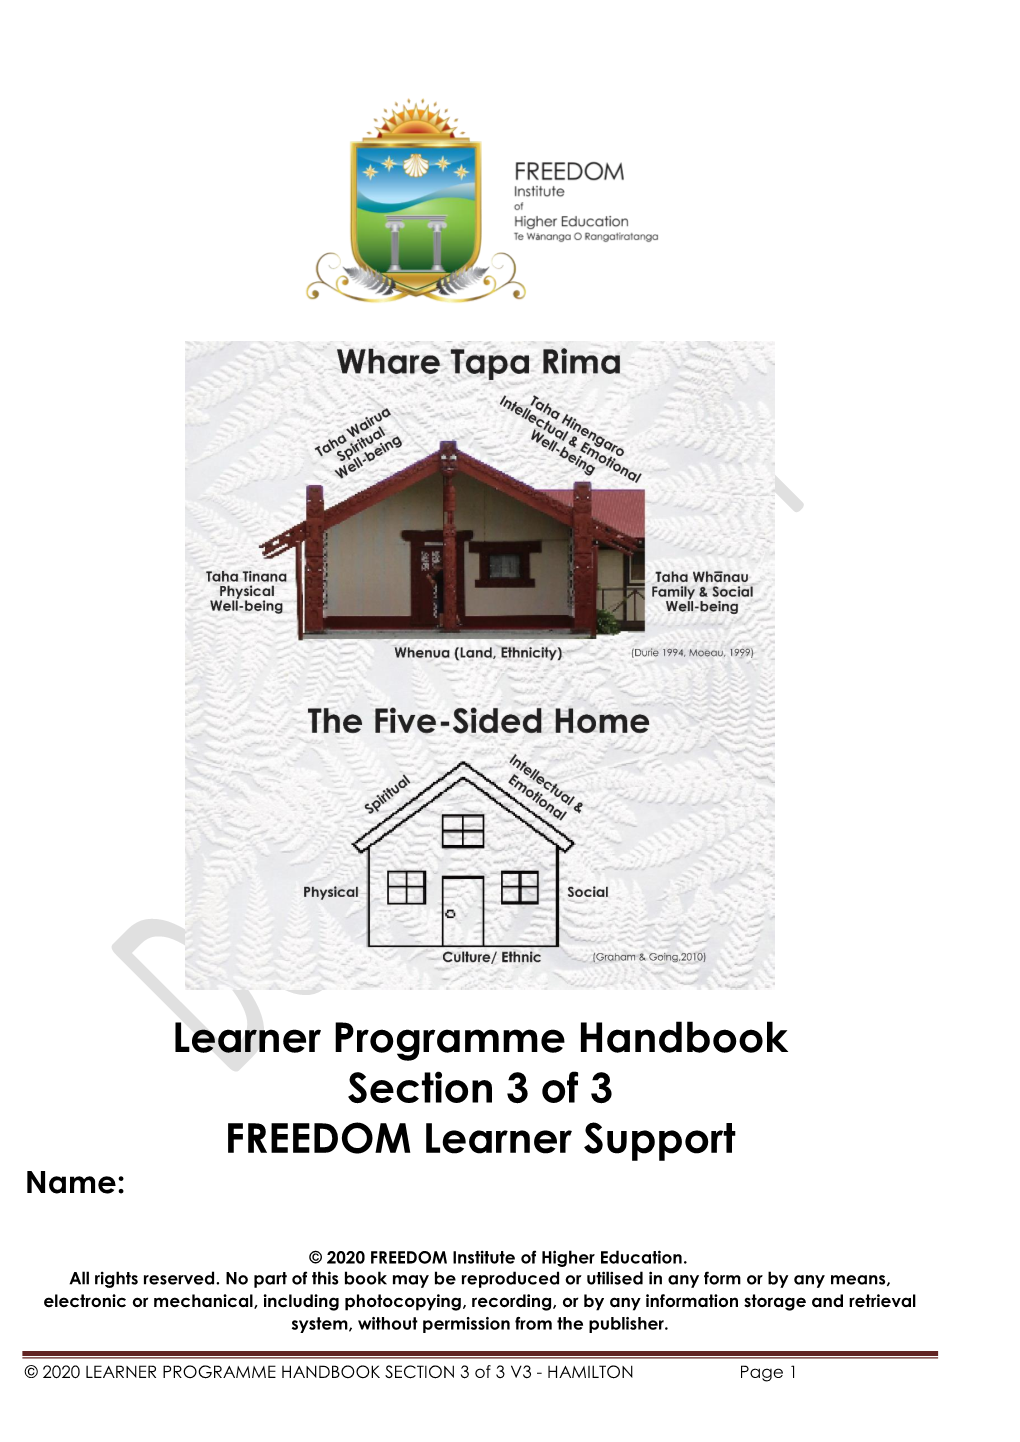 Learner Programme Handbook Section 3 of 3 FREEDOM Learner Support Name